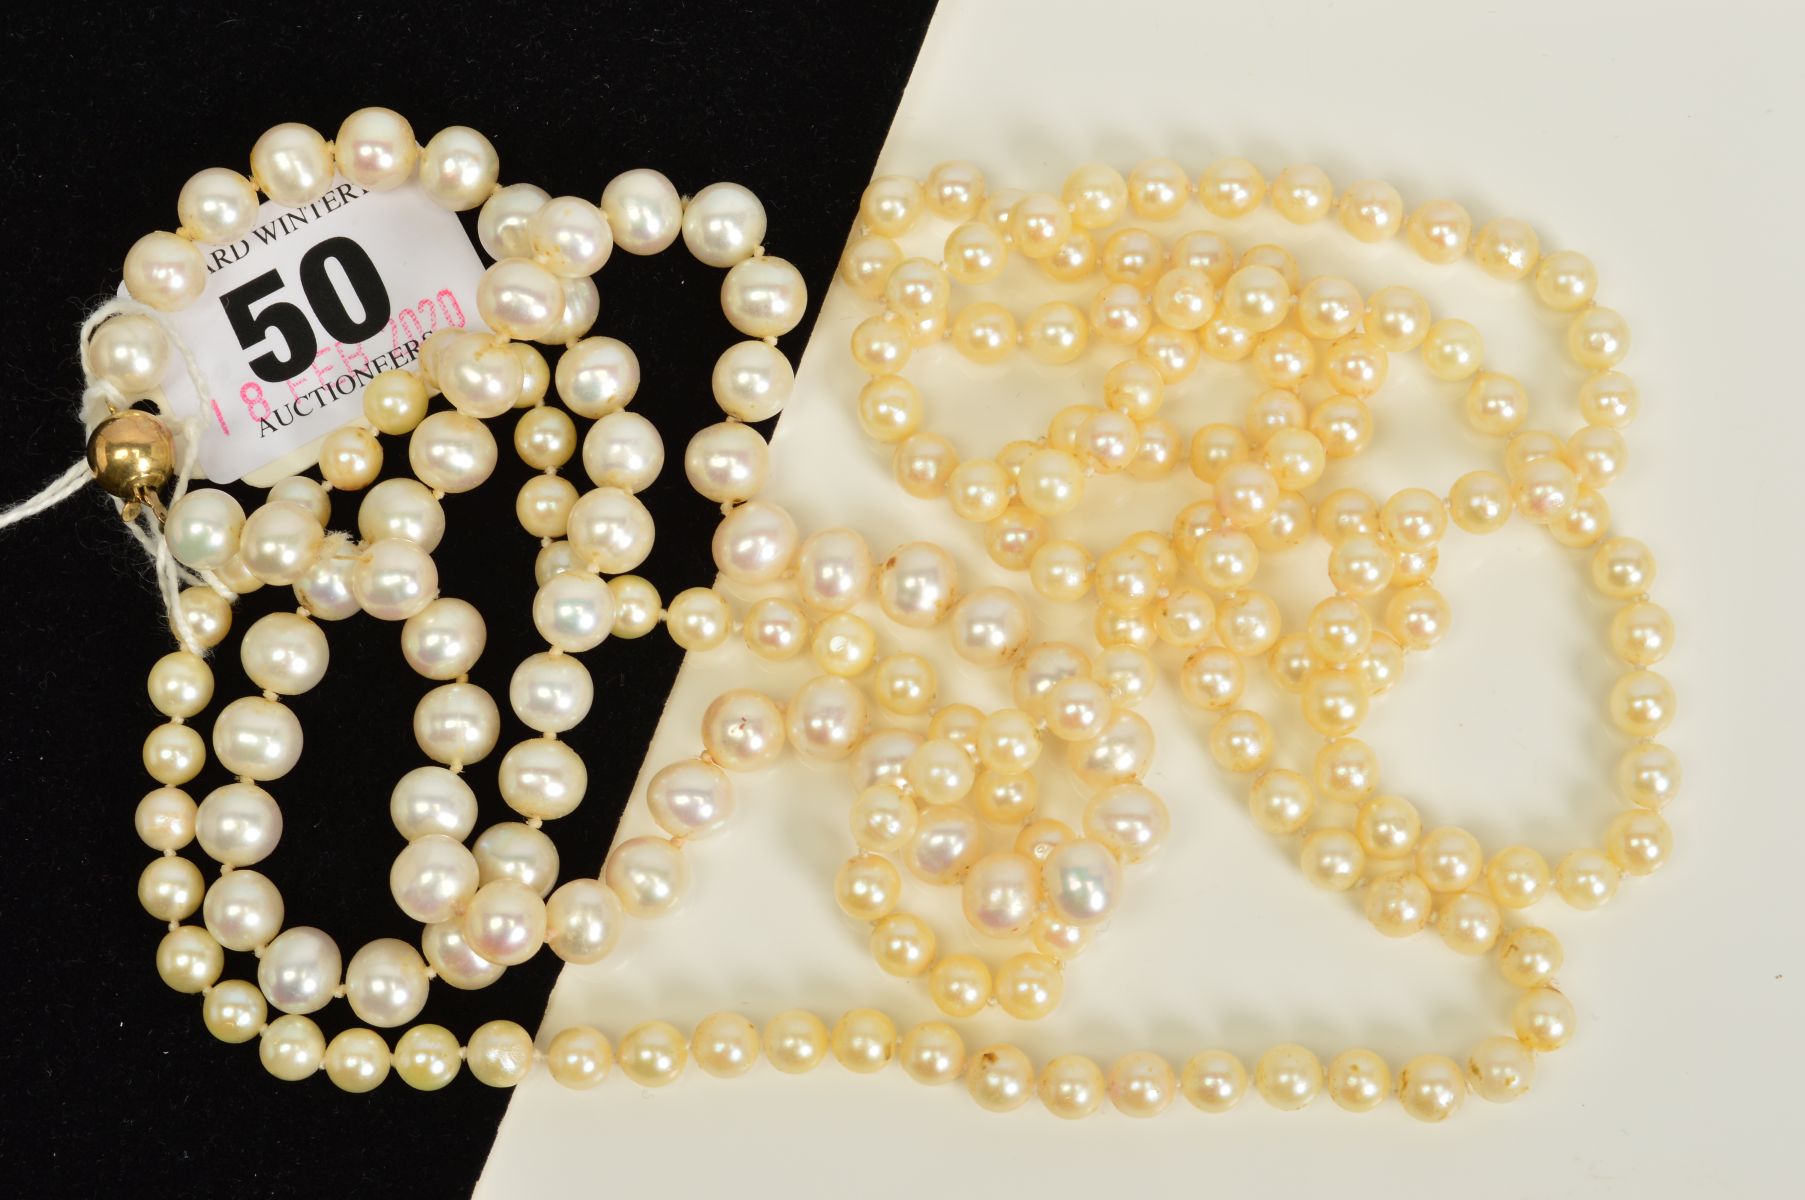 TWO CULTURED PEARL NECKLACES, both designed as a uniform row of spherical cultured pearls, one